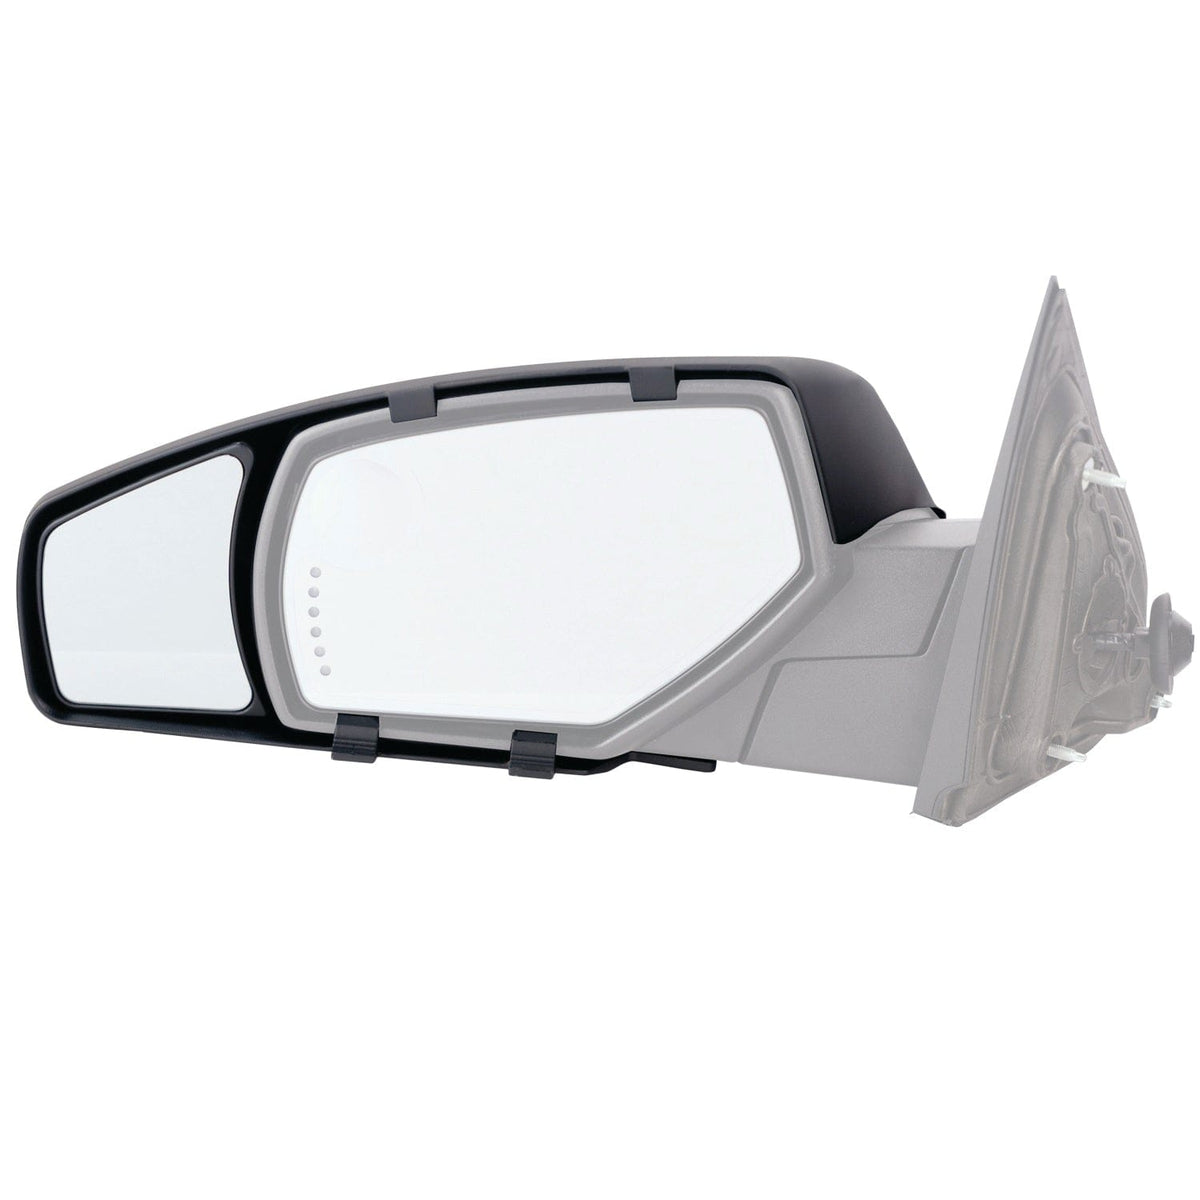 K-Source Qualifies for Free Shipping K-Source Snap-On Towing Mirrors fits Select Chevy/GMC Models 15+ #80920